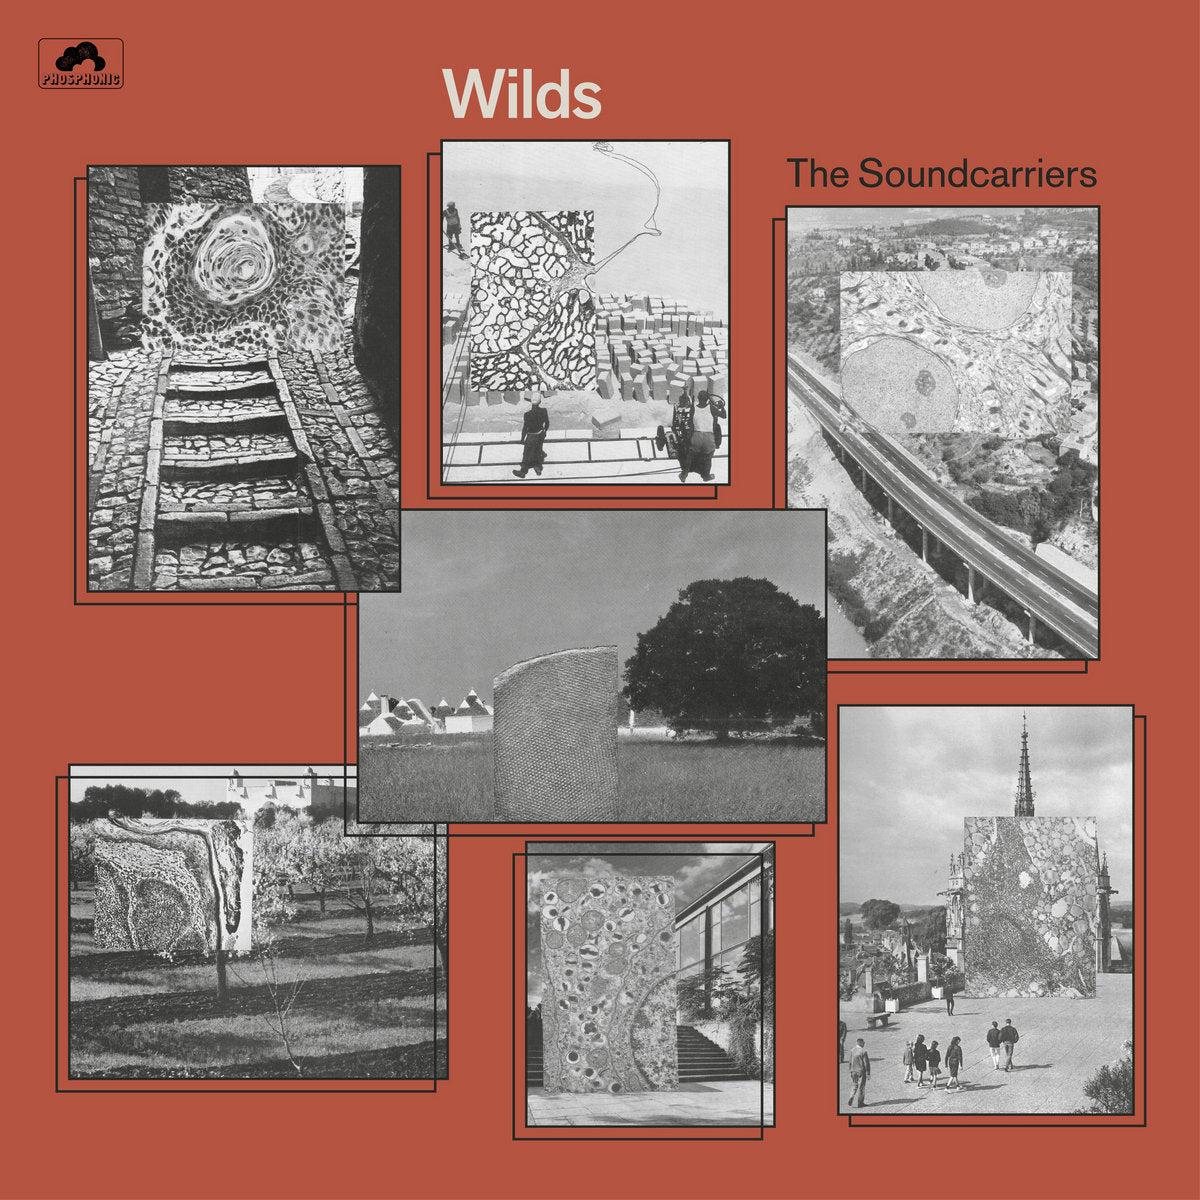 Arcade Sound - The Soundcarriers - Wilds image